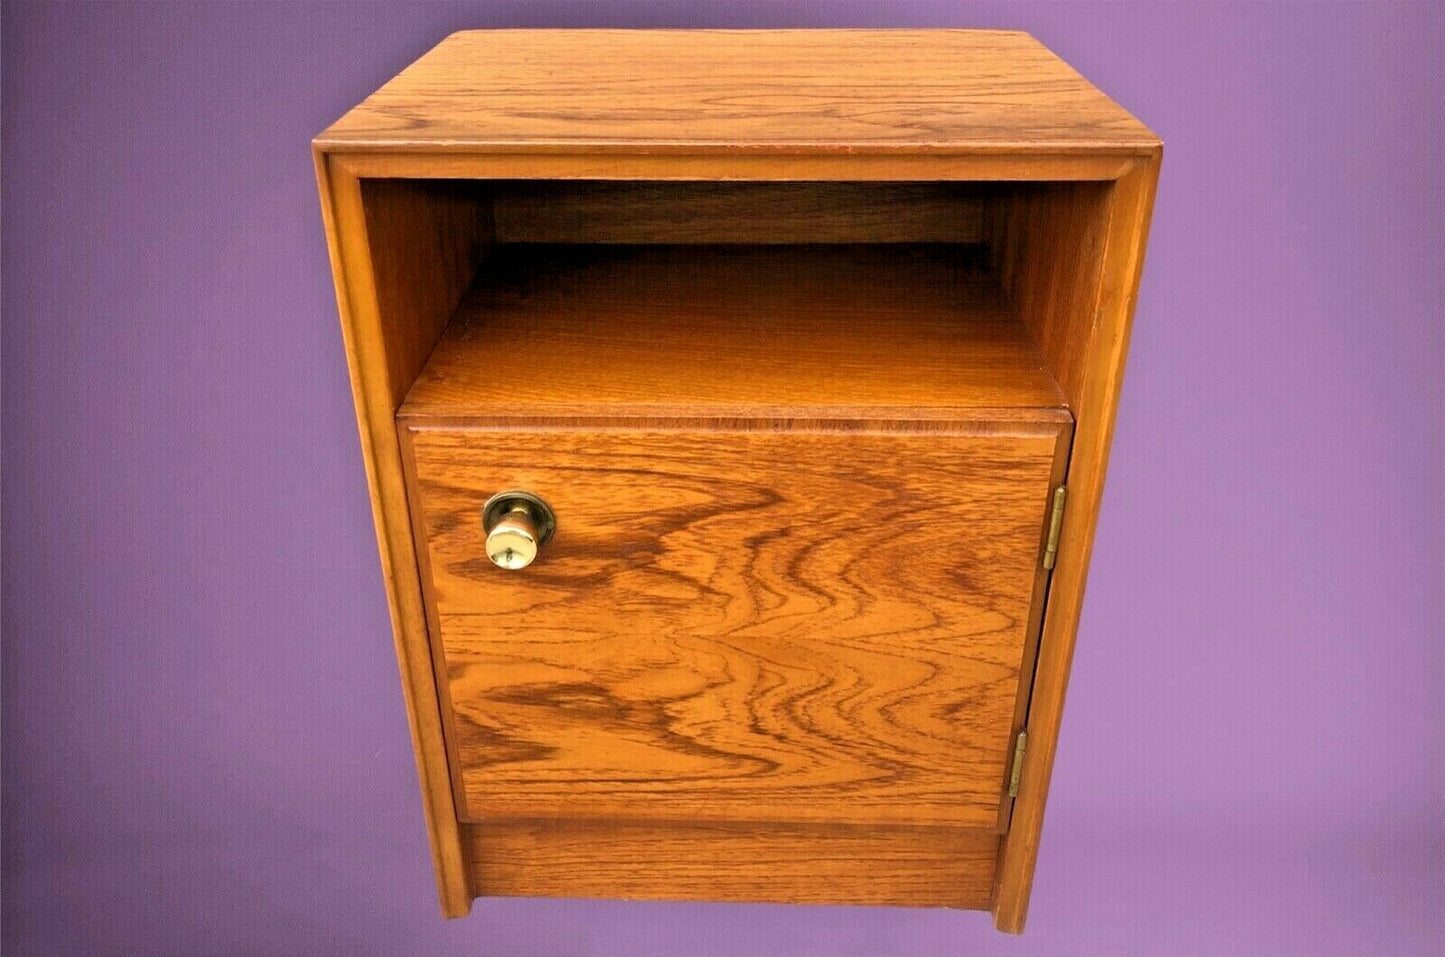 A Pair Of Retro Teak Bedside Cabinets By Meredew ( SOLD )